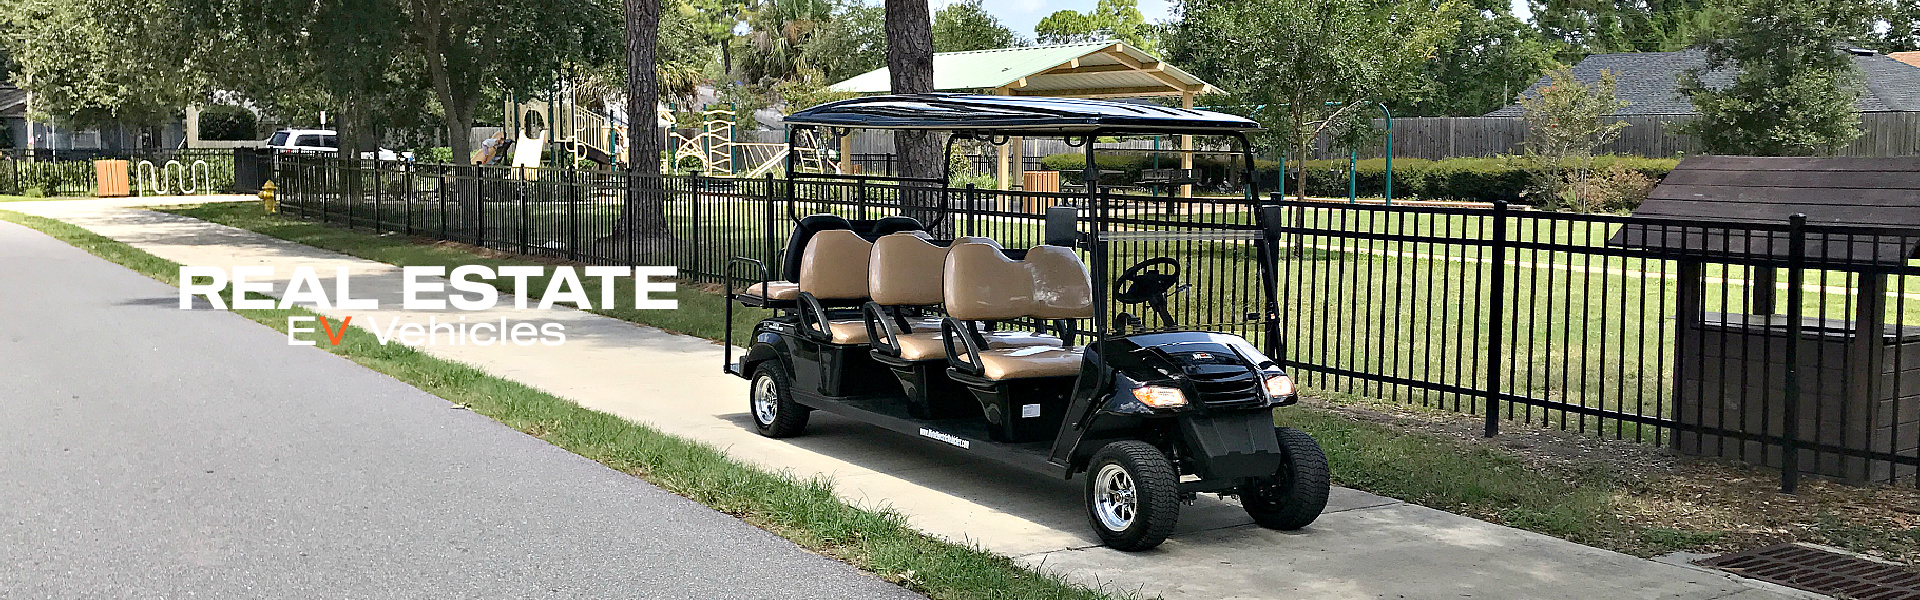 Golf Carts for the Real Estate Industry